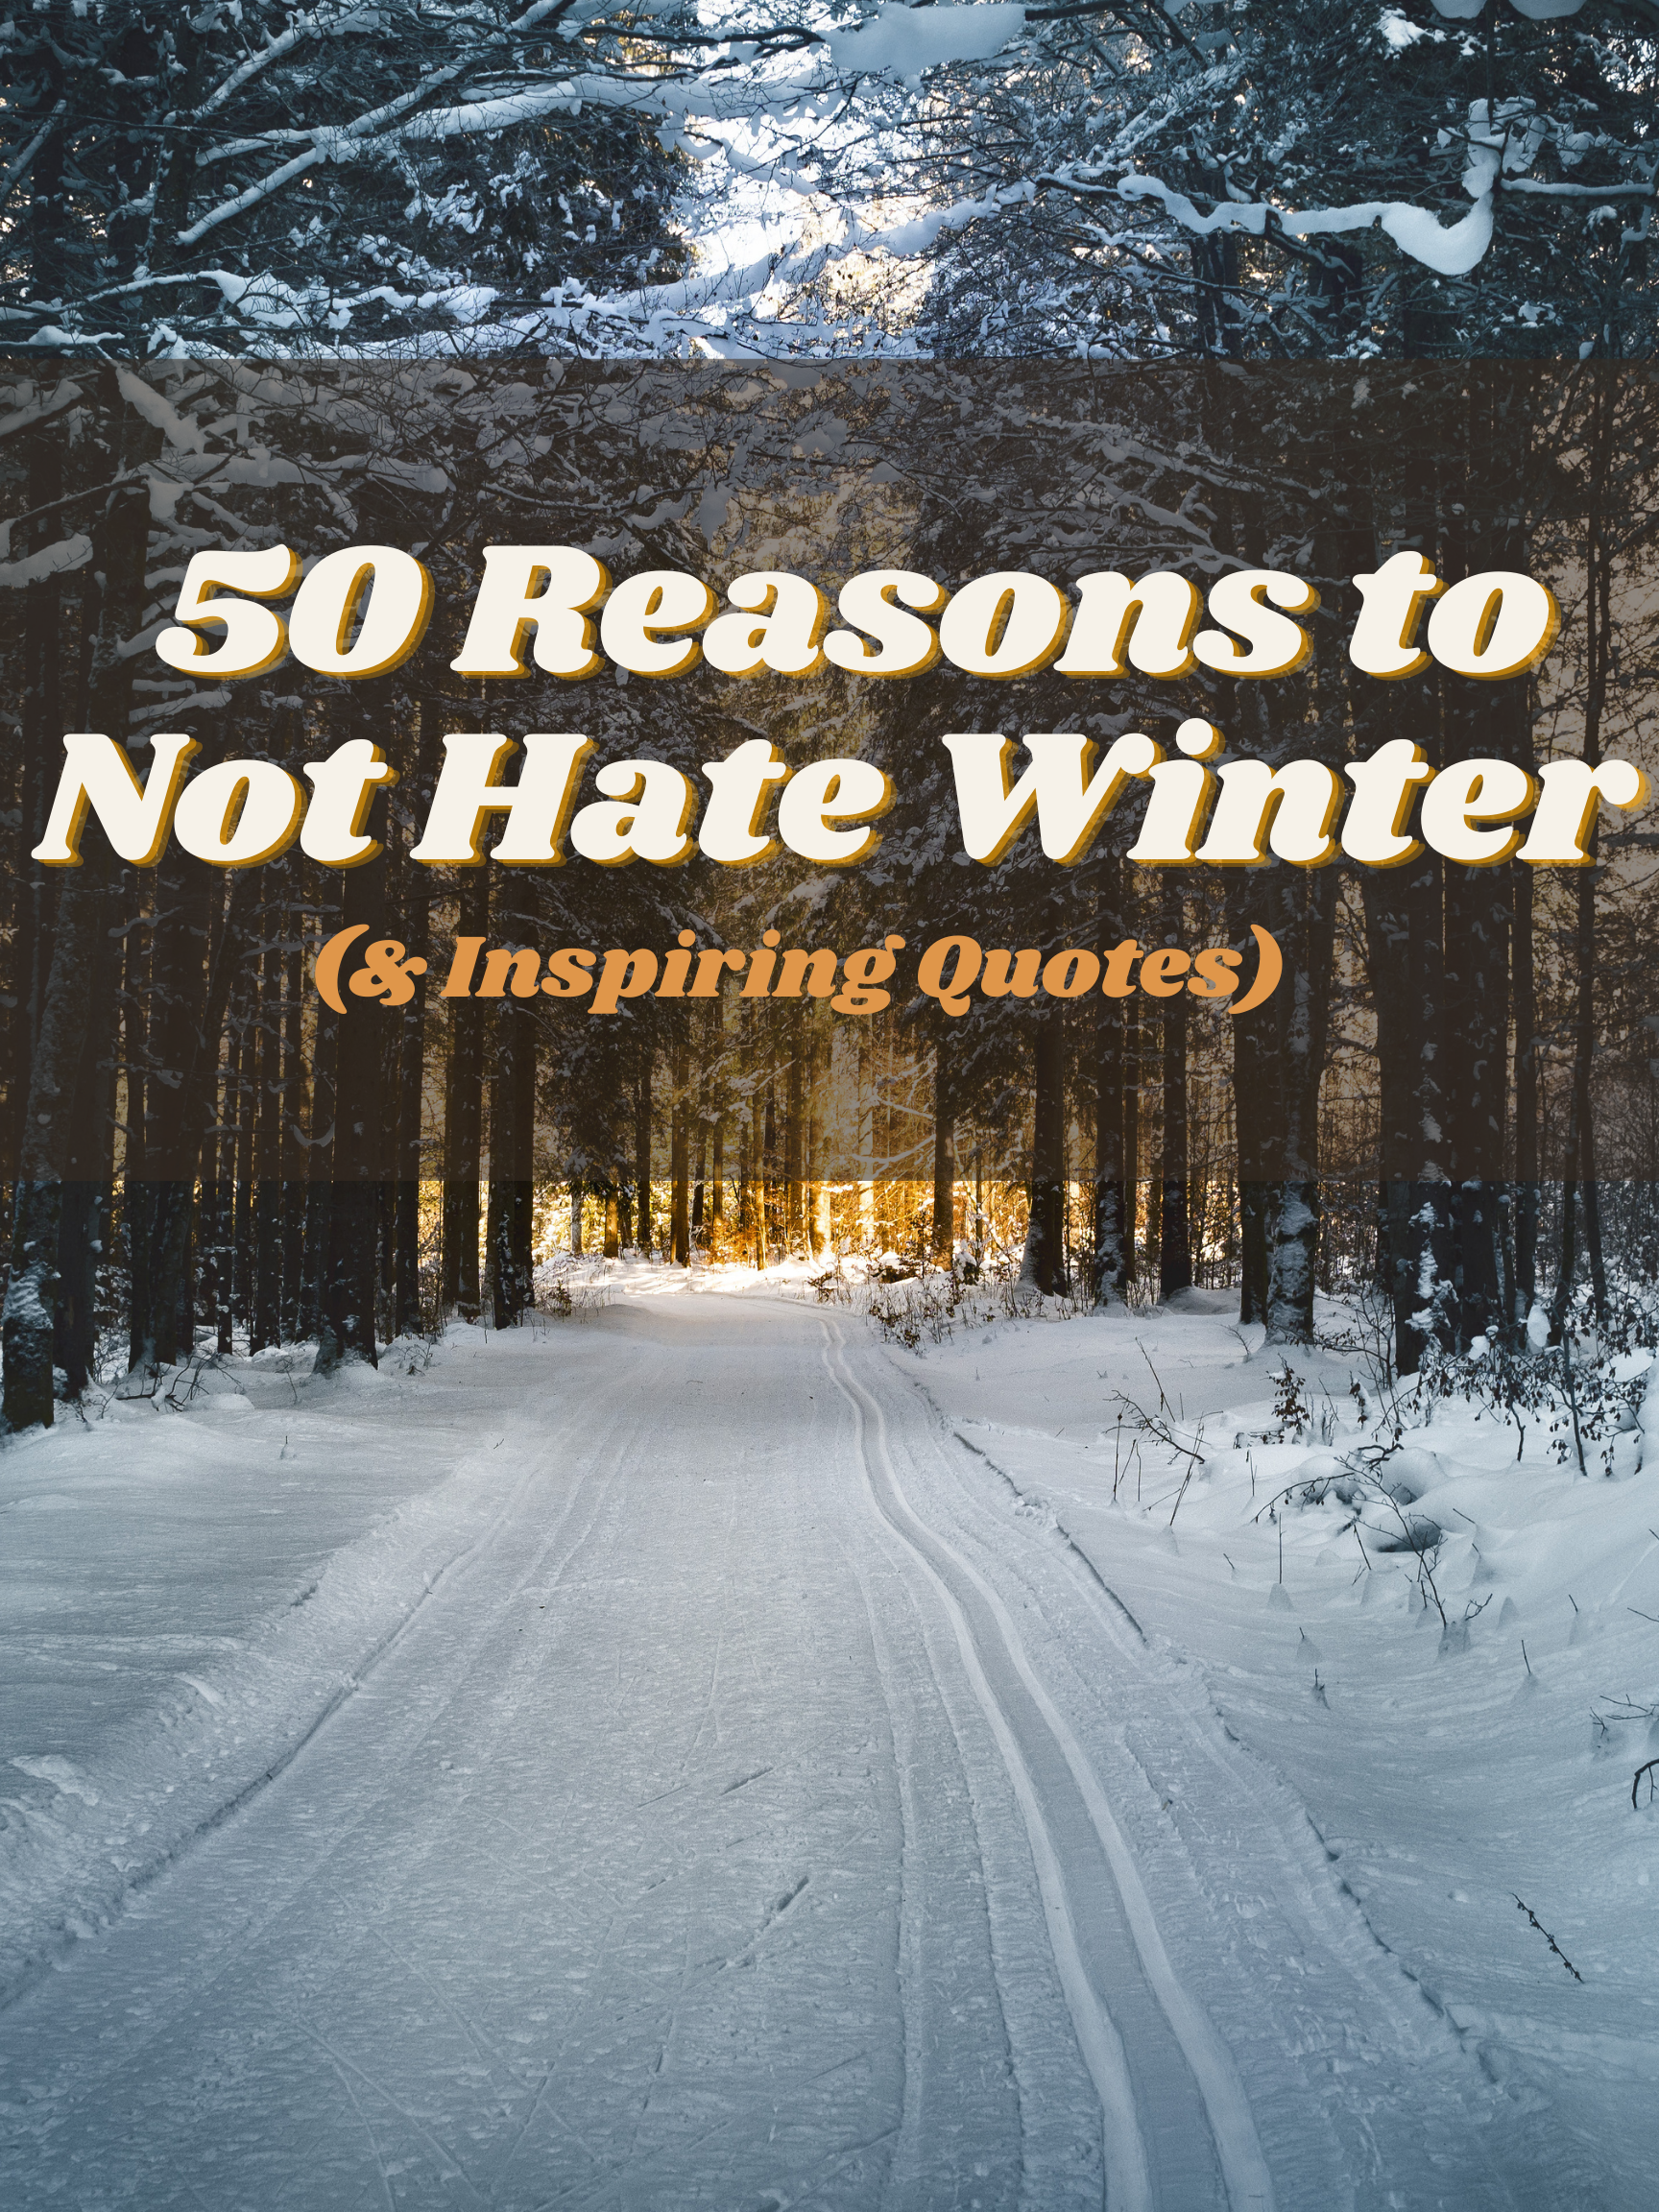 50 Reasons to Not Hate Winter (& Inspiring Quotes)